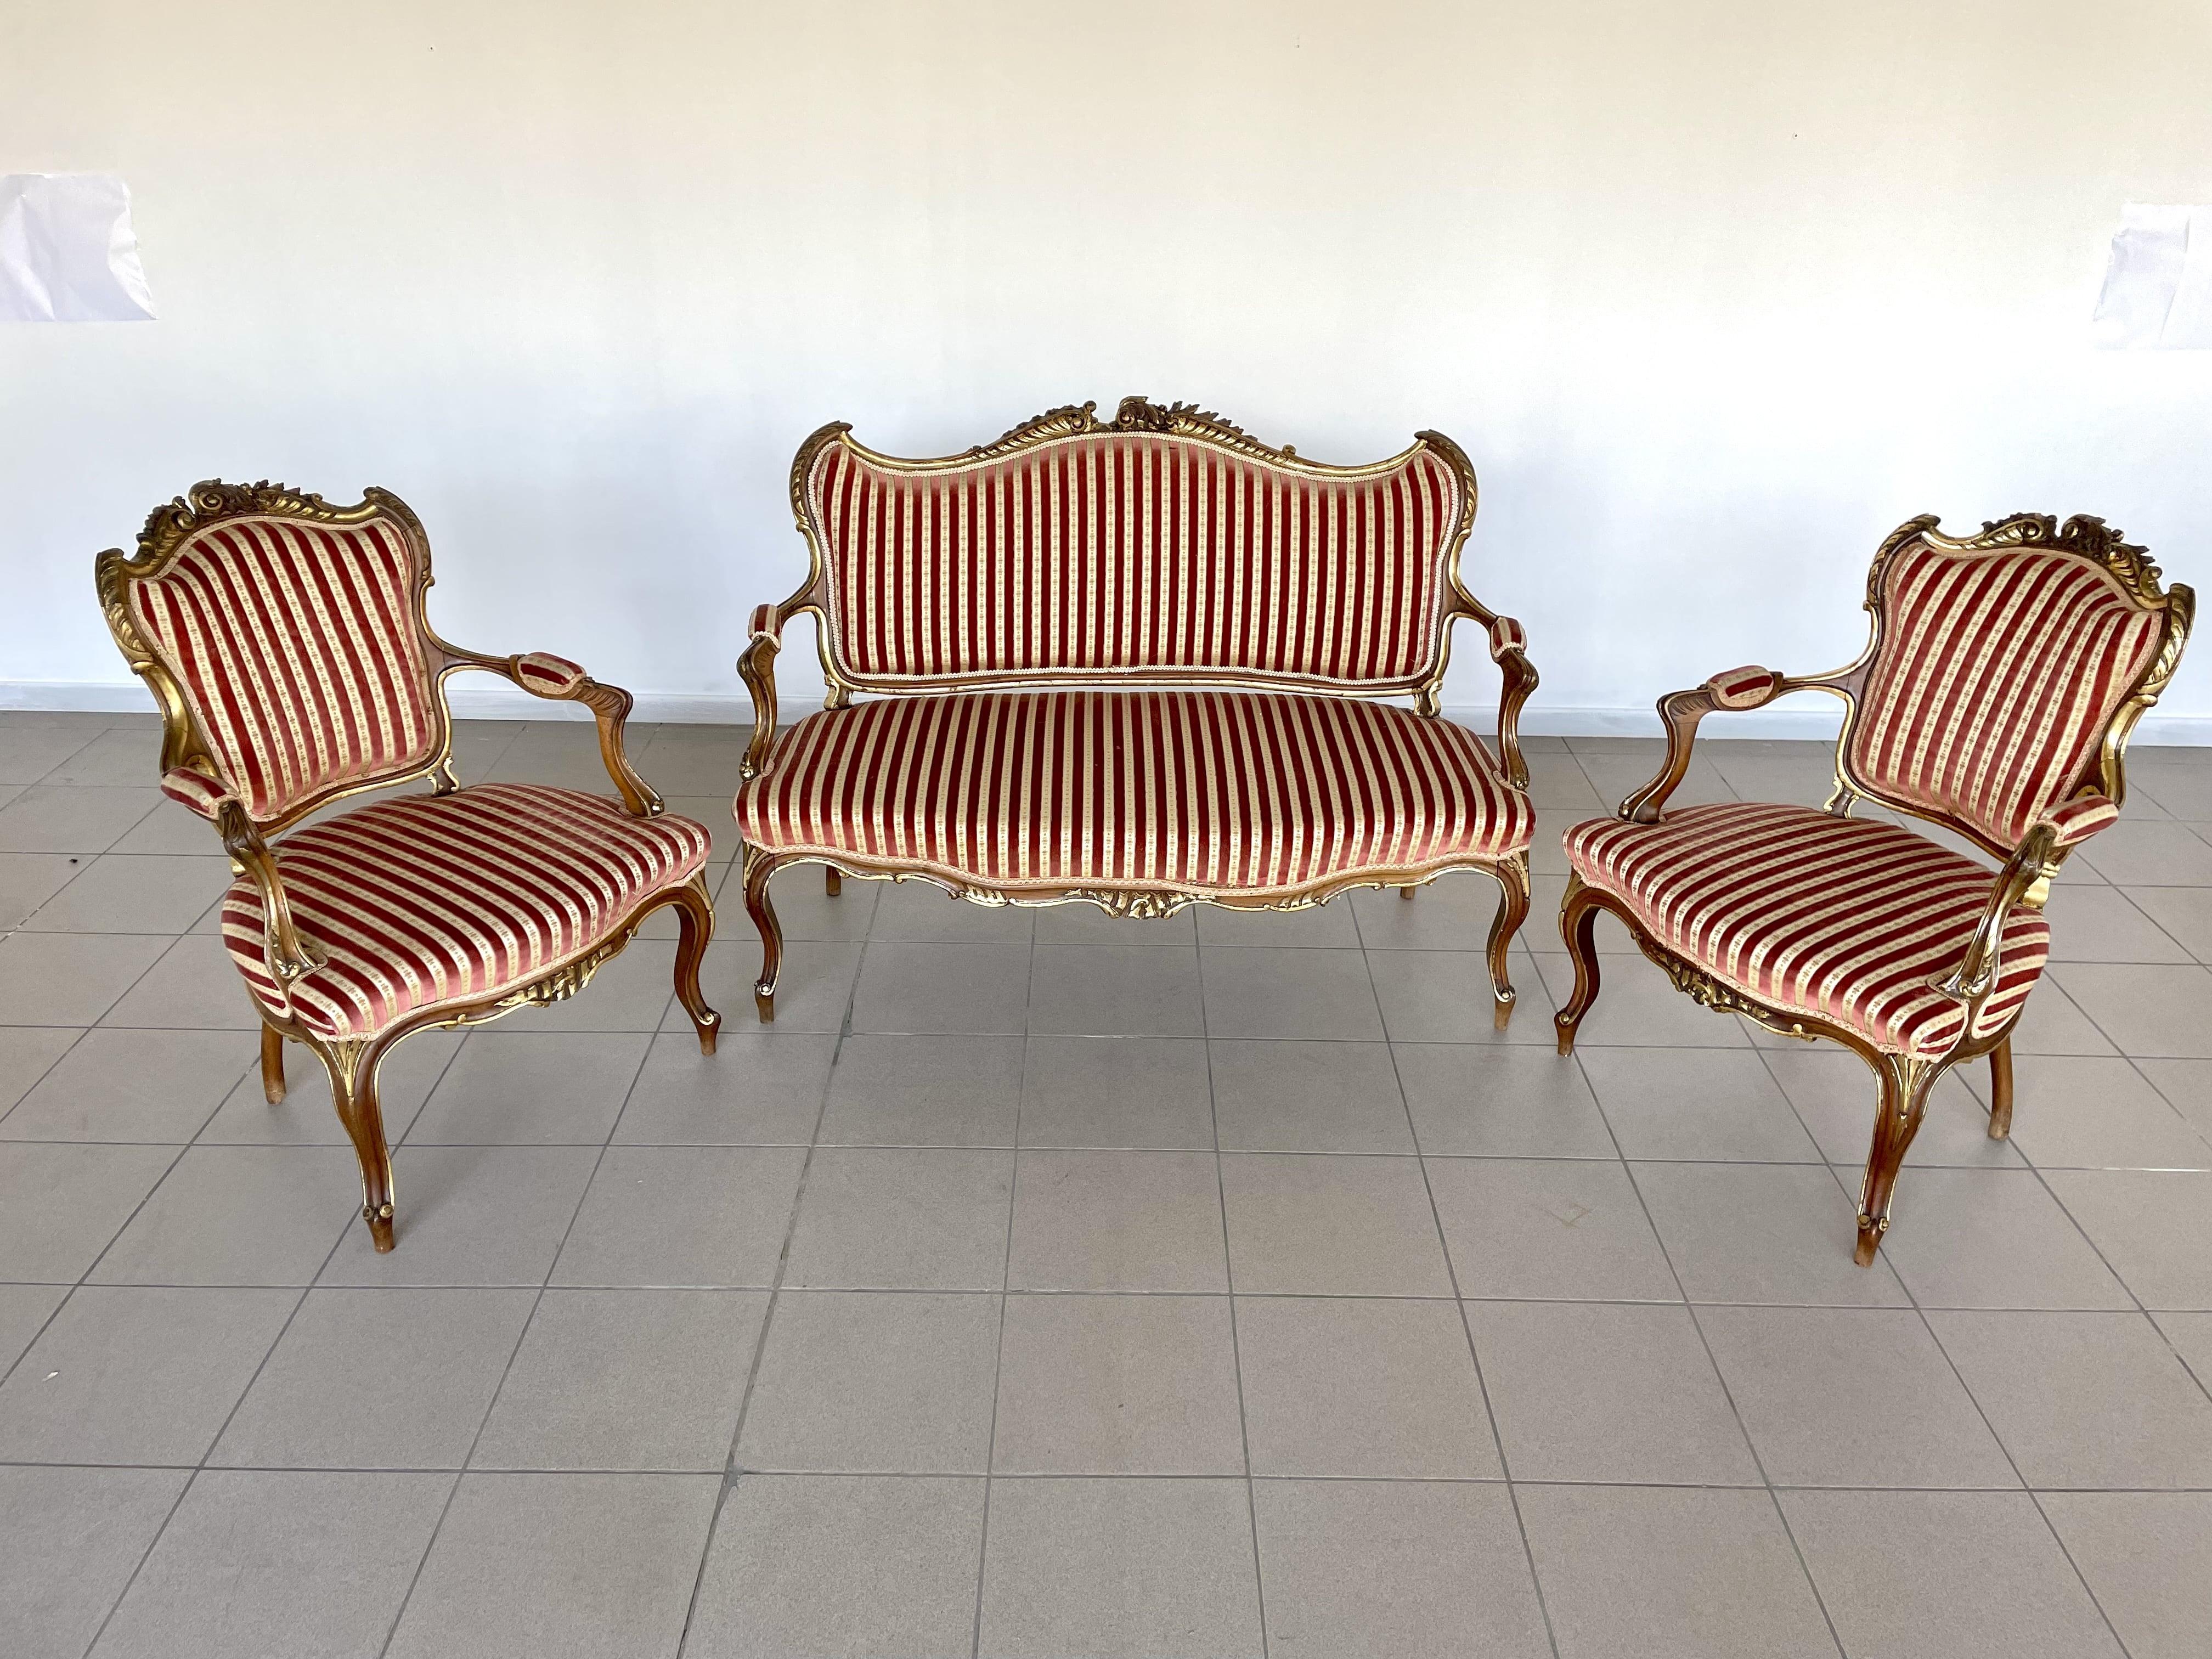 French 19th Century  Louis XV Canapé / Sofa Set With Matching Armchairs - 3 Pieces